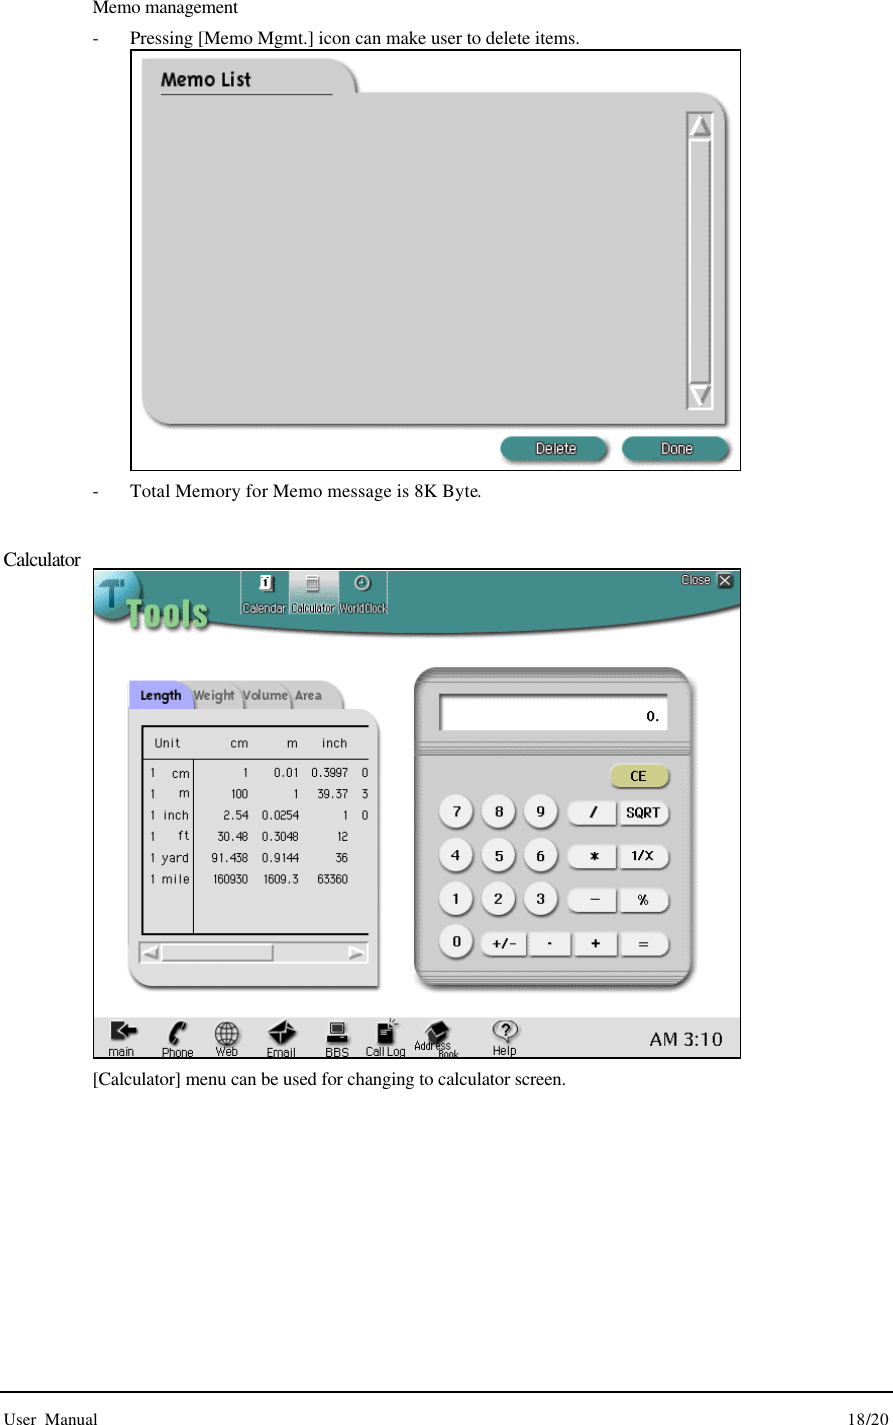  User Manual                                                                                        18/20 Memo management - Pressing [Memo Mgmt.] icon can make user to delete items.  - Total Memory for Memo message is 8K Byte.  Calculator  [Calculator] menu can be used for changing to calculator screen.      